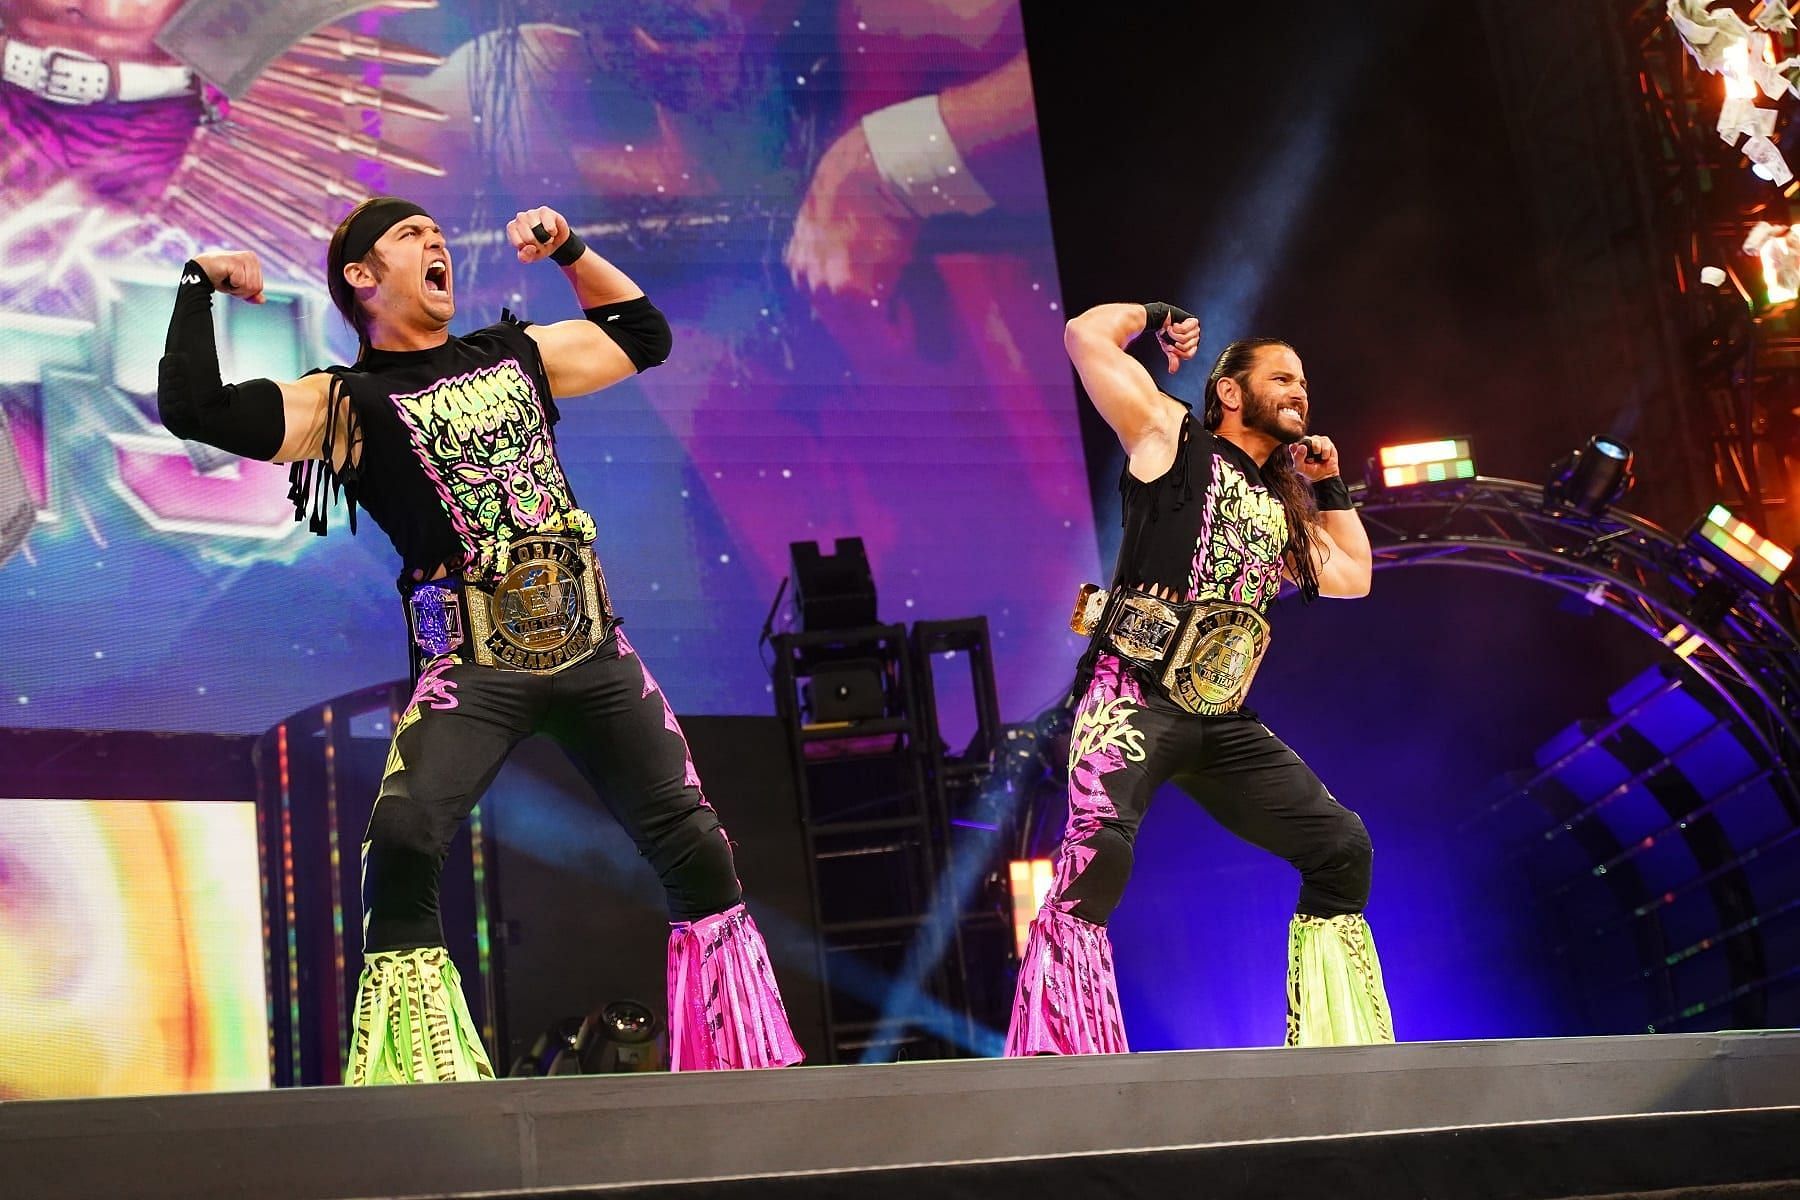 Matt and Nick Jackson have established themselves as two of the top tag team stars in the world.